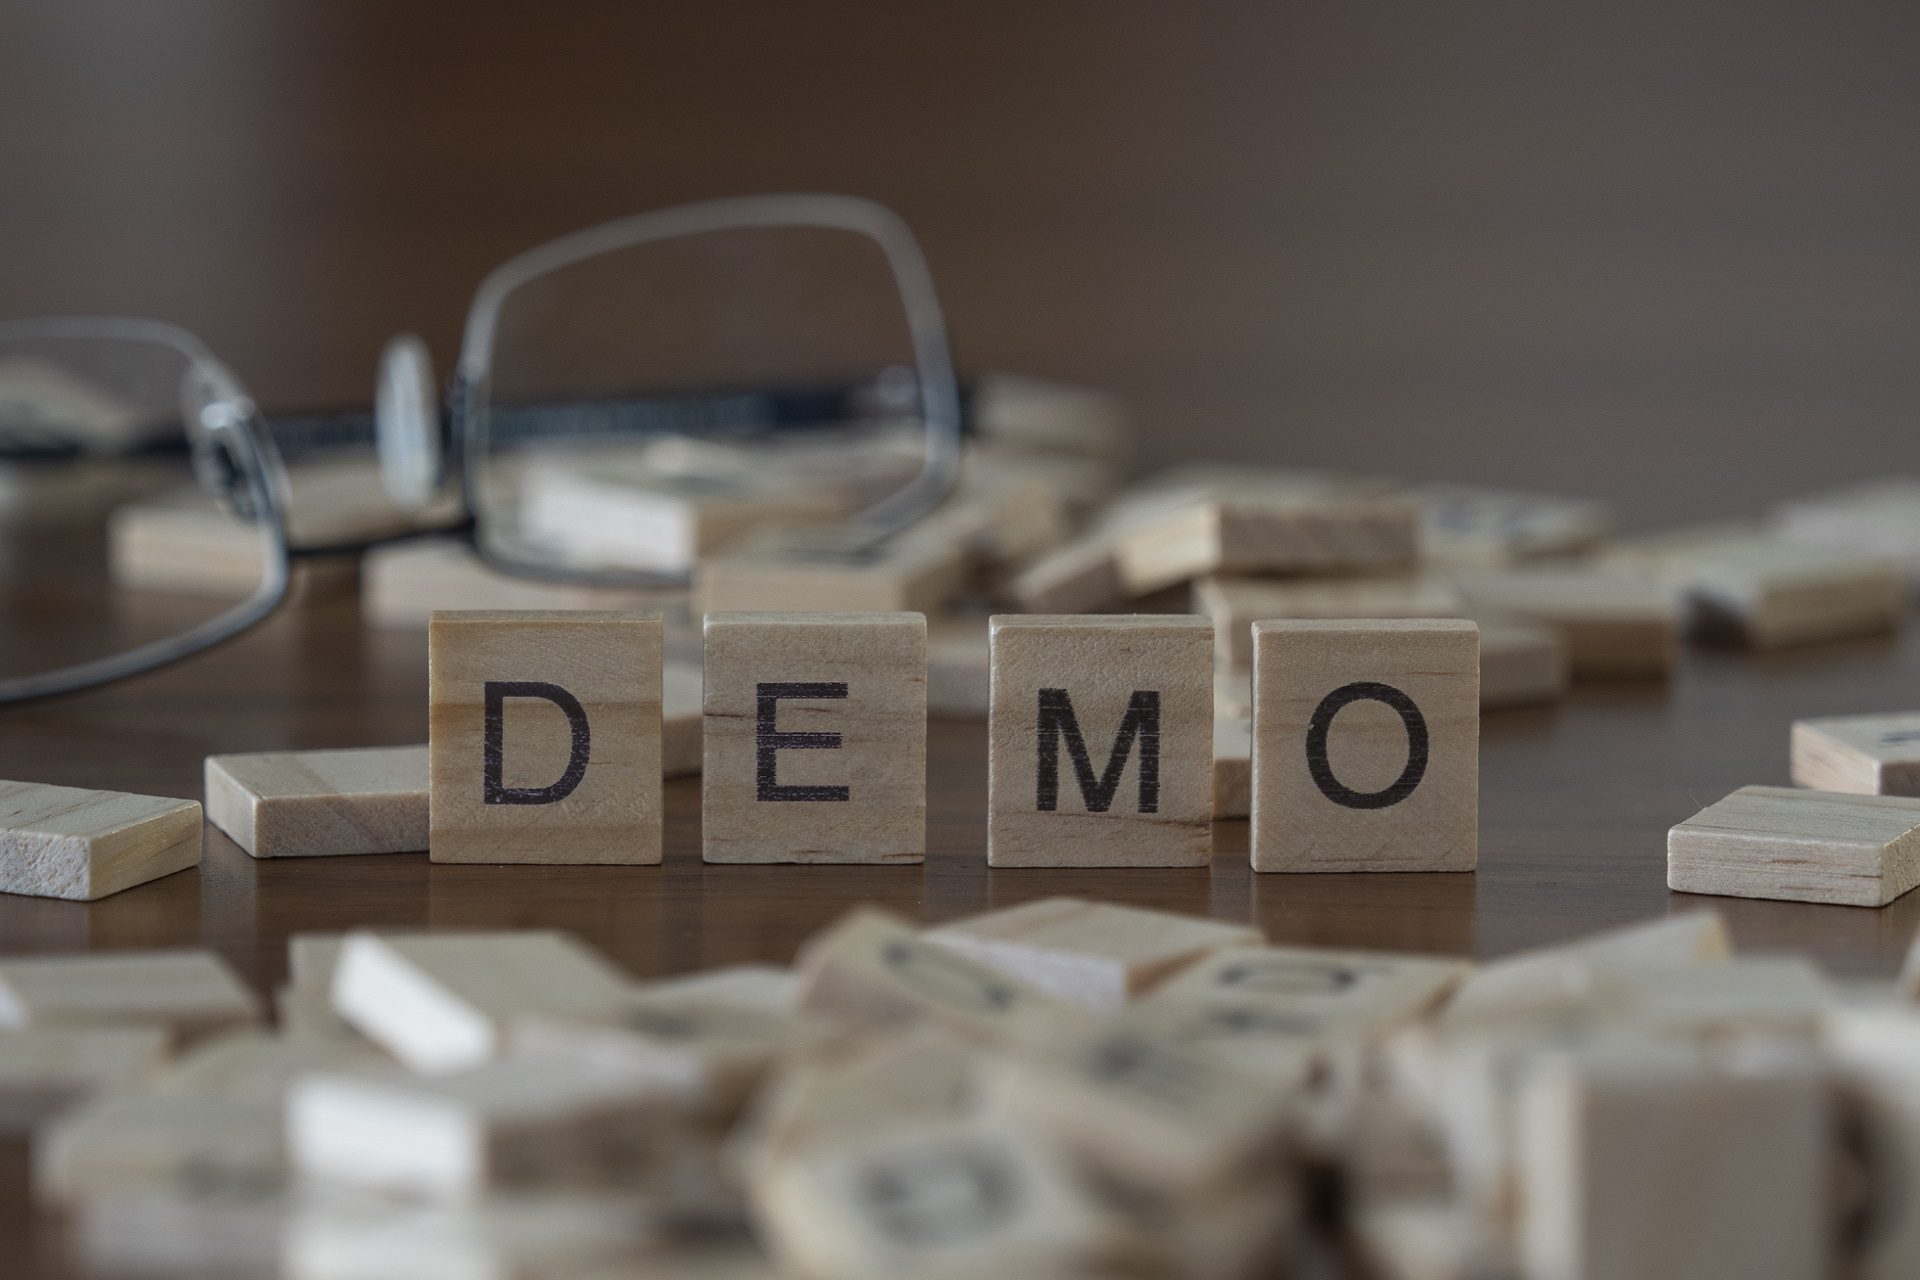 blocks spelling out "Demo", symbolic representation for how to build an email list with free demos